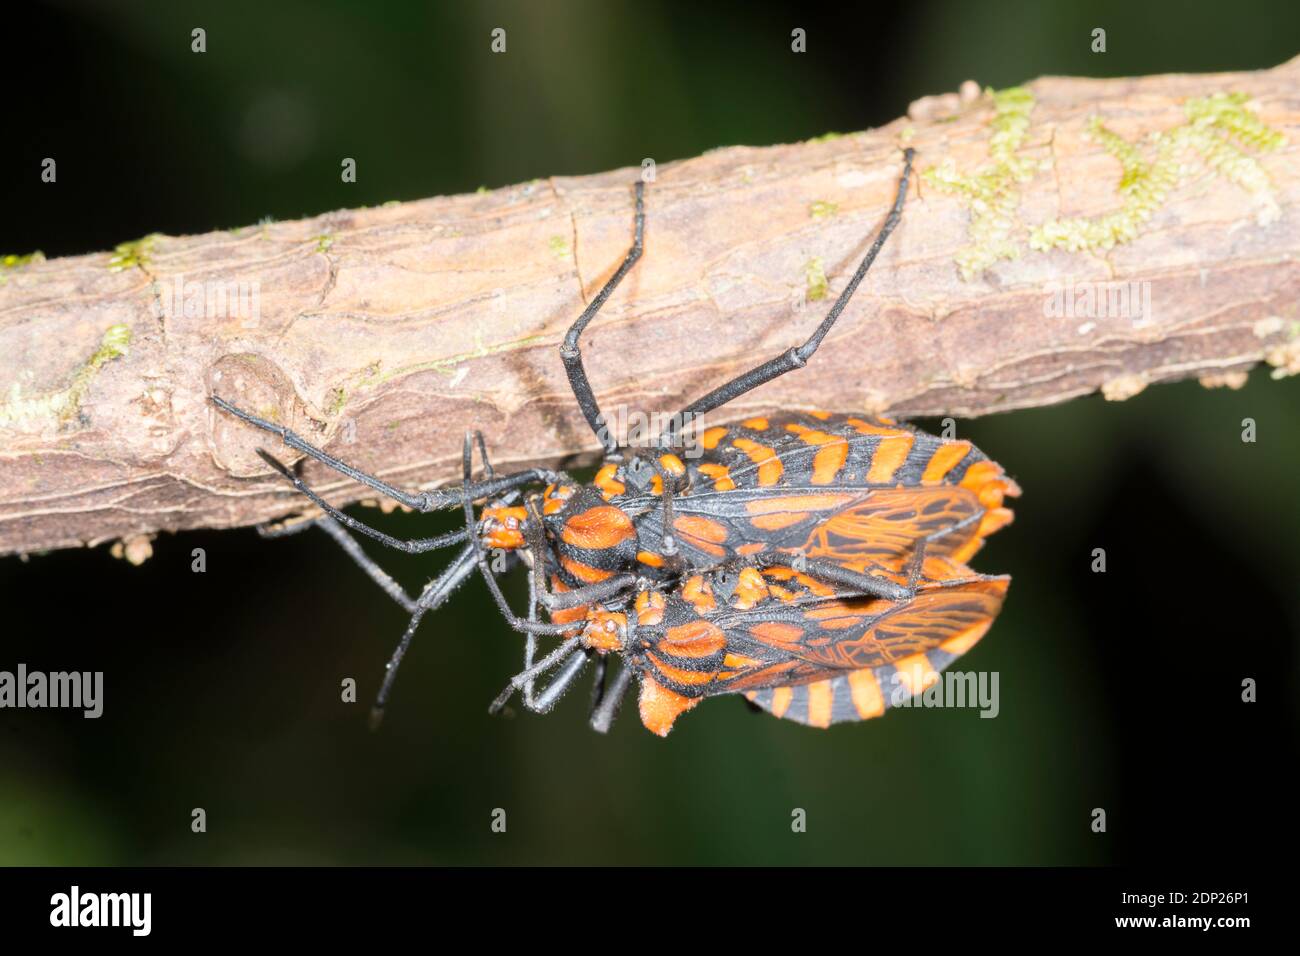 Mating pair of leaf-footed bugs (Spartocera pantomima, family Coreidae) on a branch in the understory of montane rainforest in the Los Cedros Reserve, Stock Photo